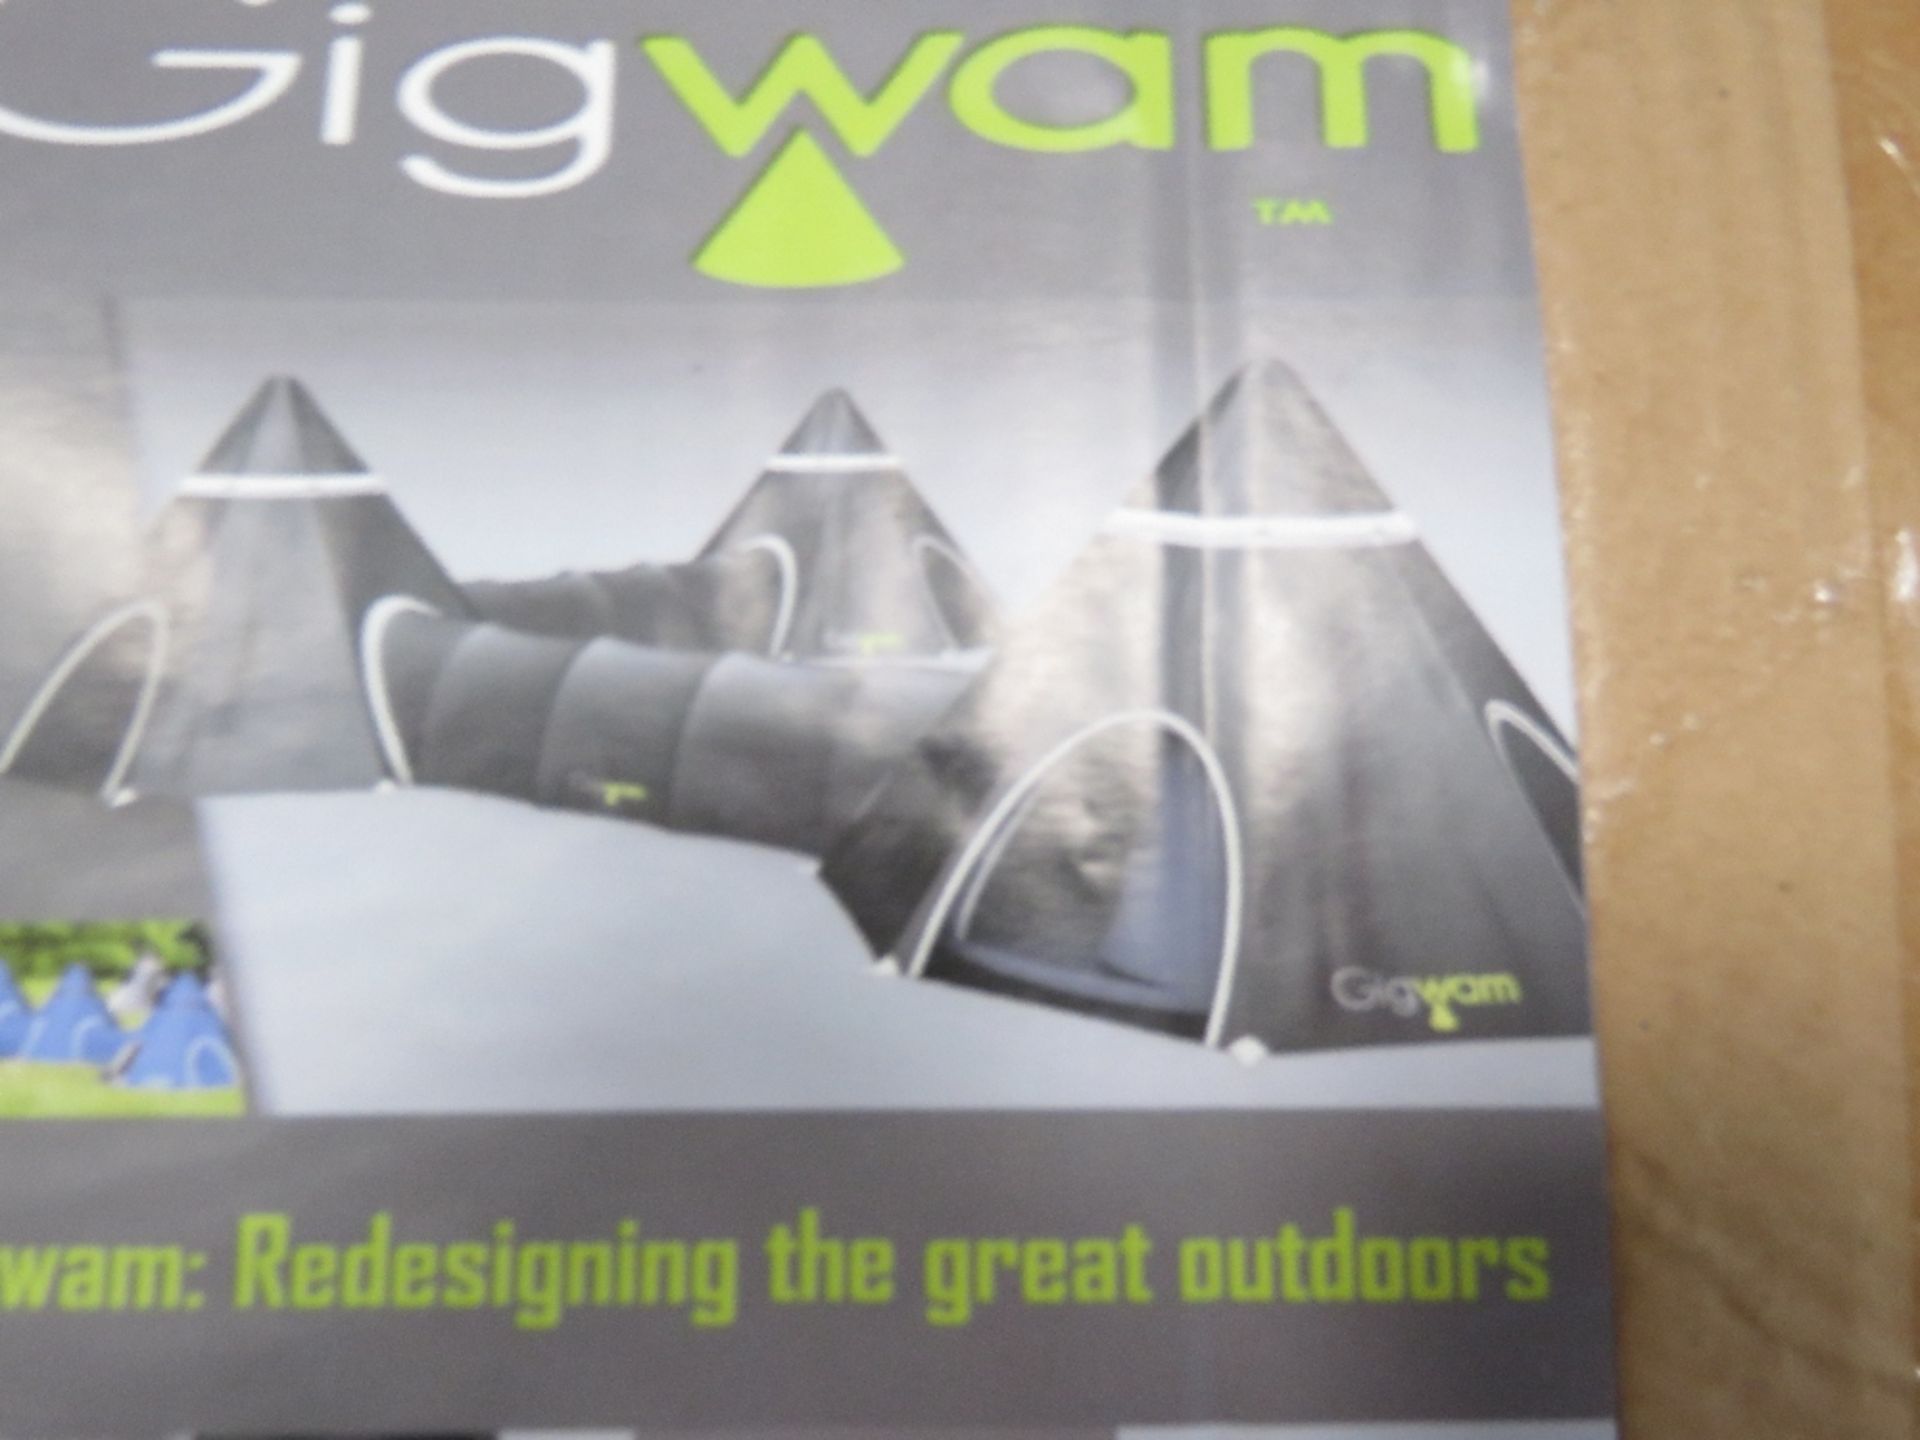 GIGWAM TENTS: 3 X BOXES CONTAINING 3 TENTS IN EACH. IDEAL FOR FESTIVALS ETC, THE TENTS HAVE A MAIN " - Image 2 of 3